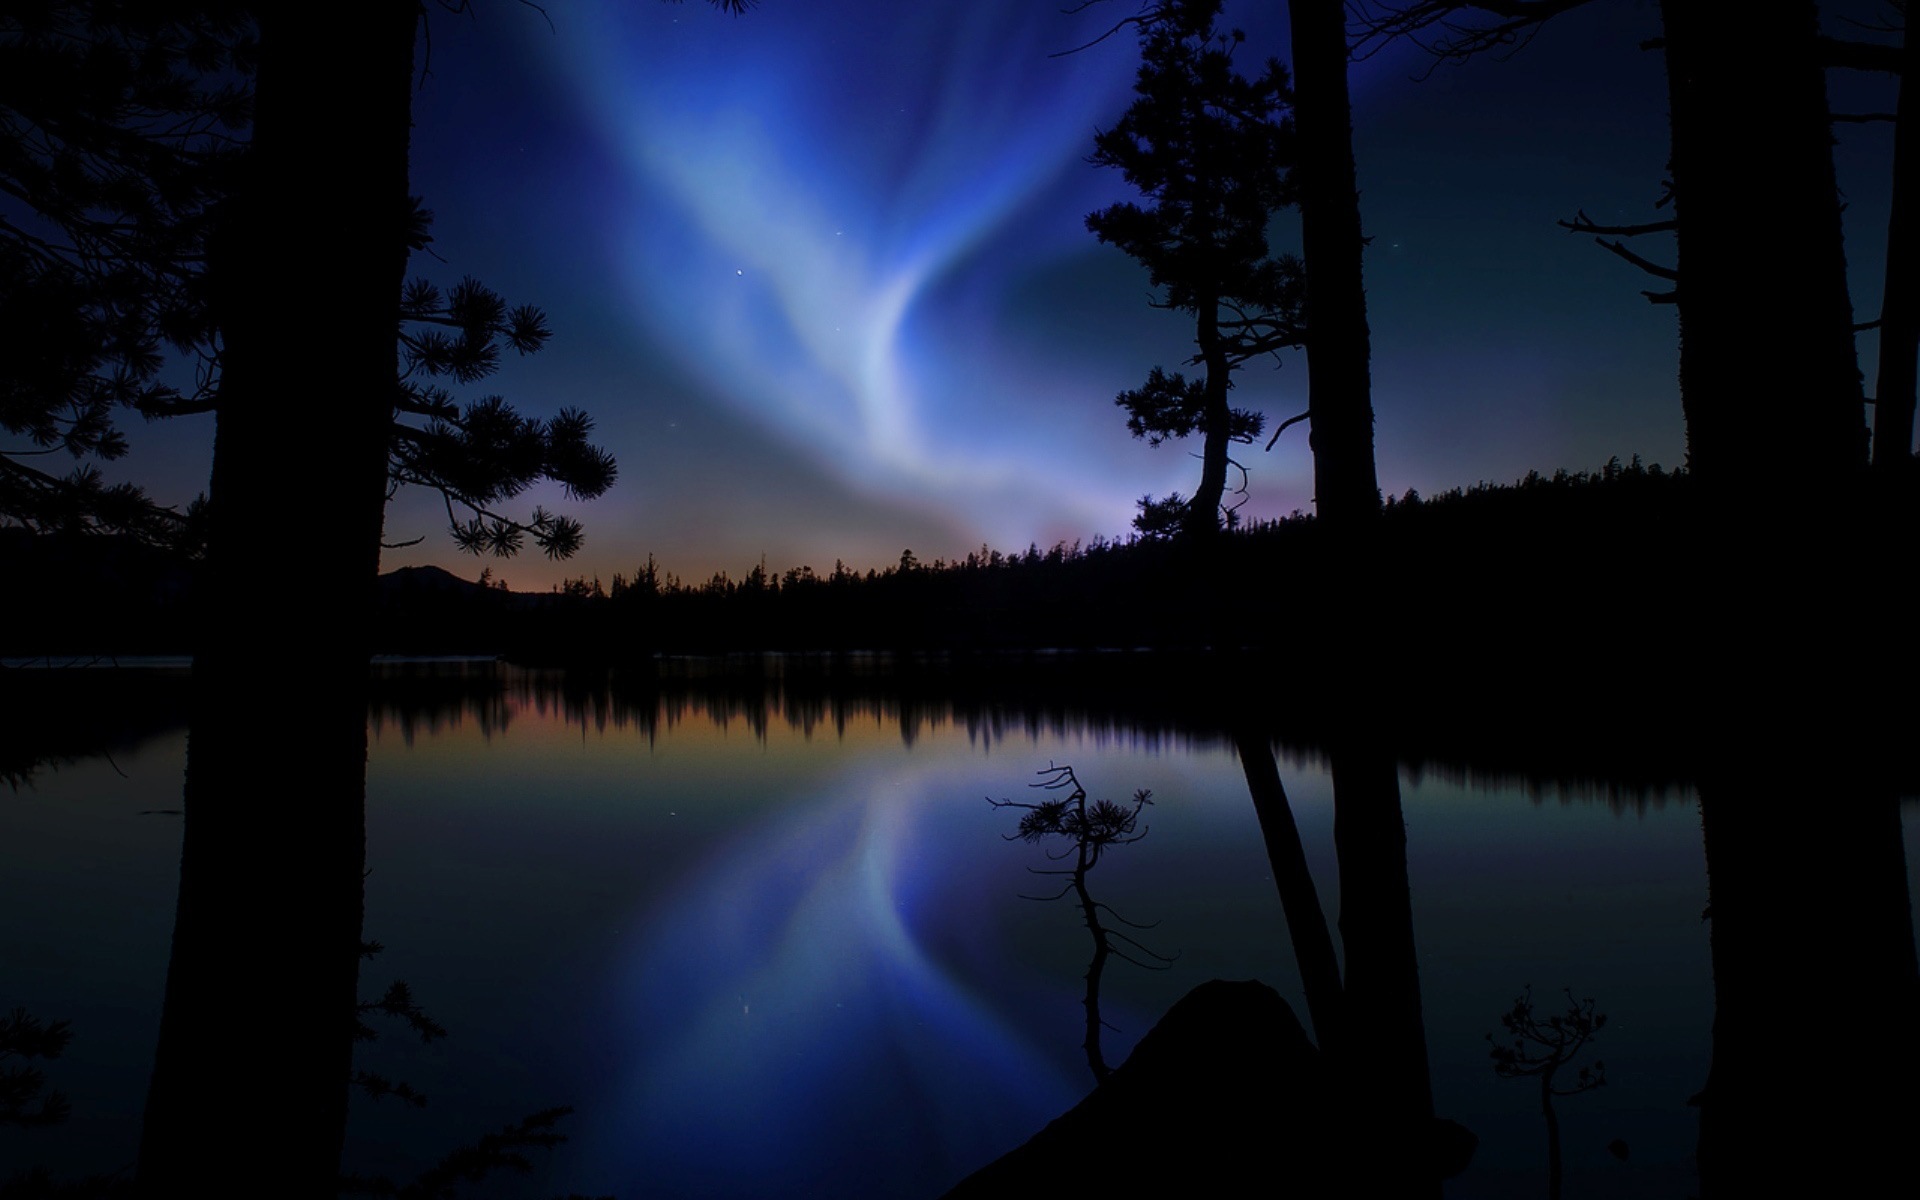 Natural wonders of the Northern Lights HD Wallpaper (1) #11 - 1920x1200